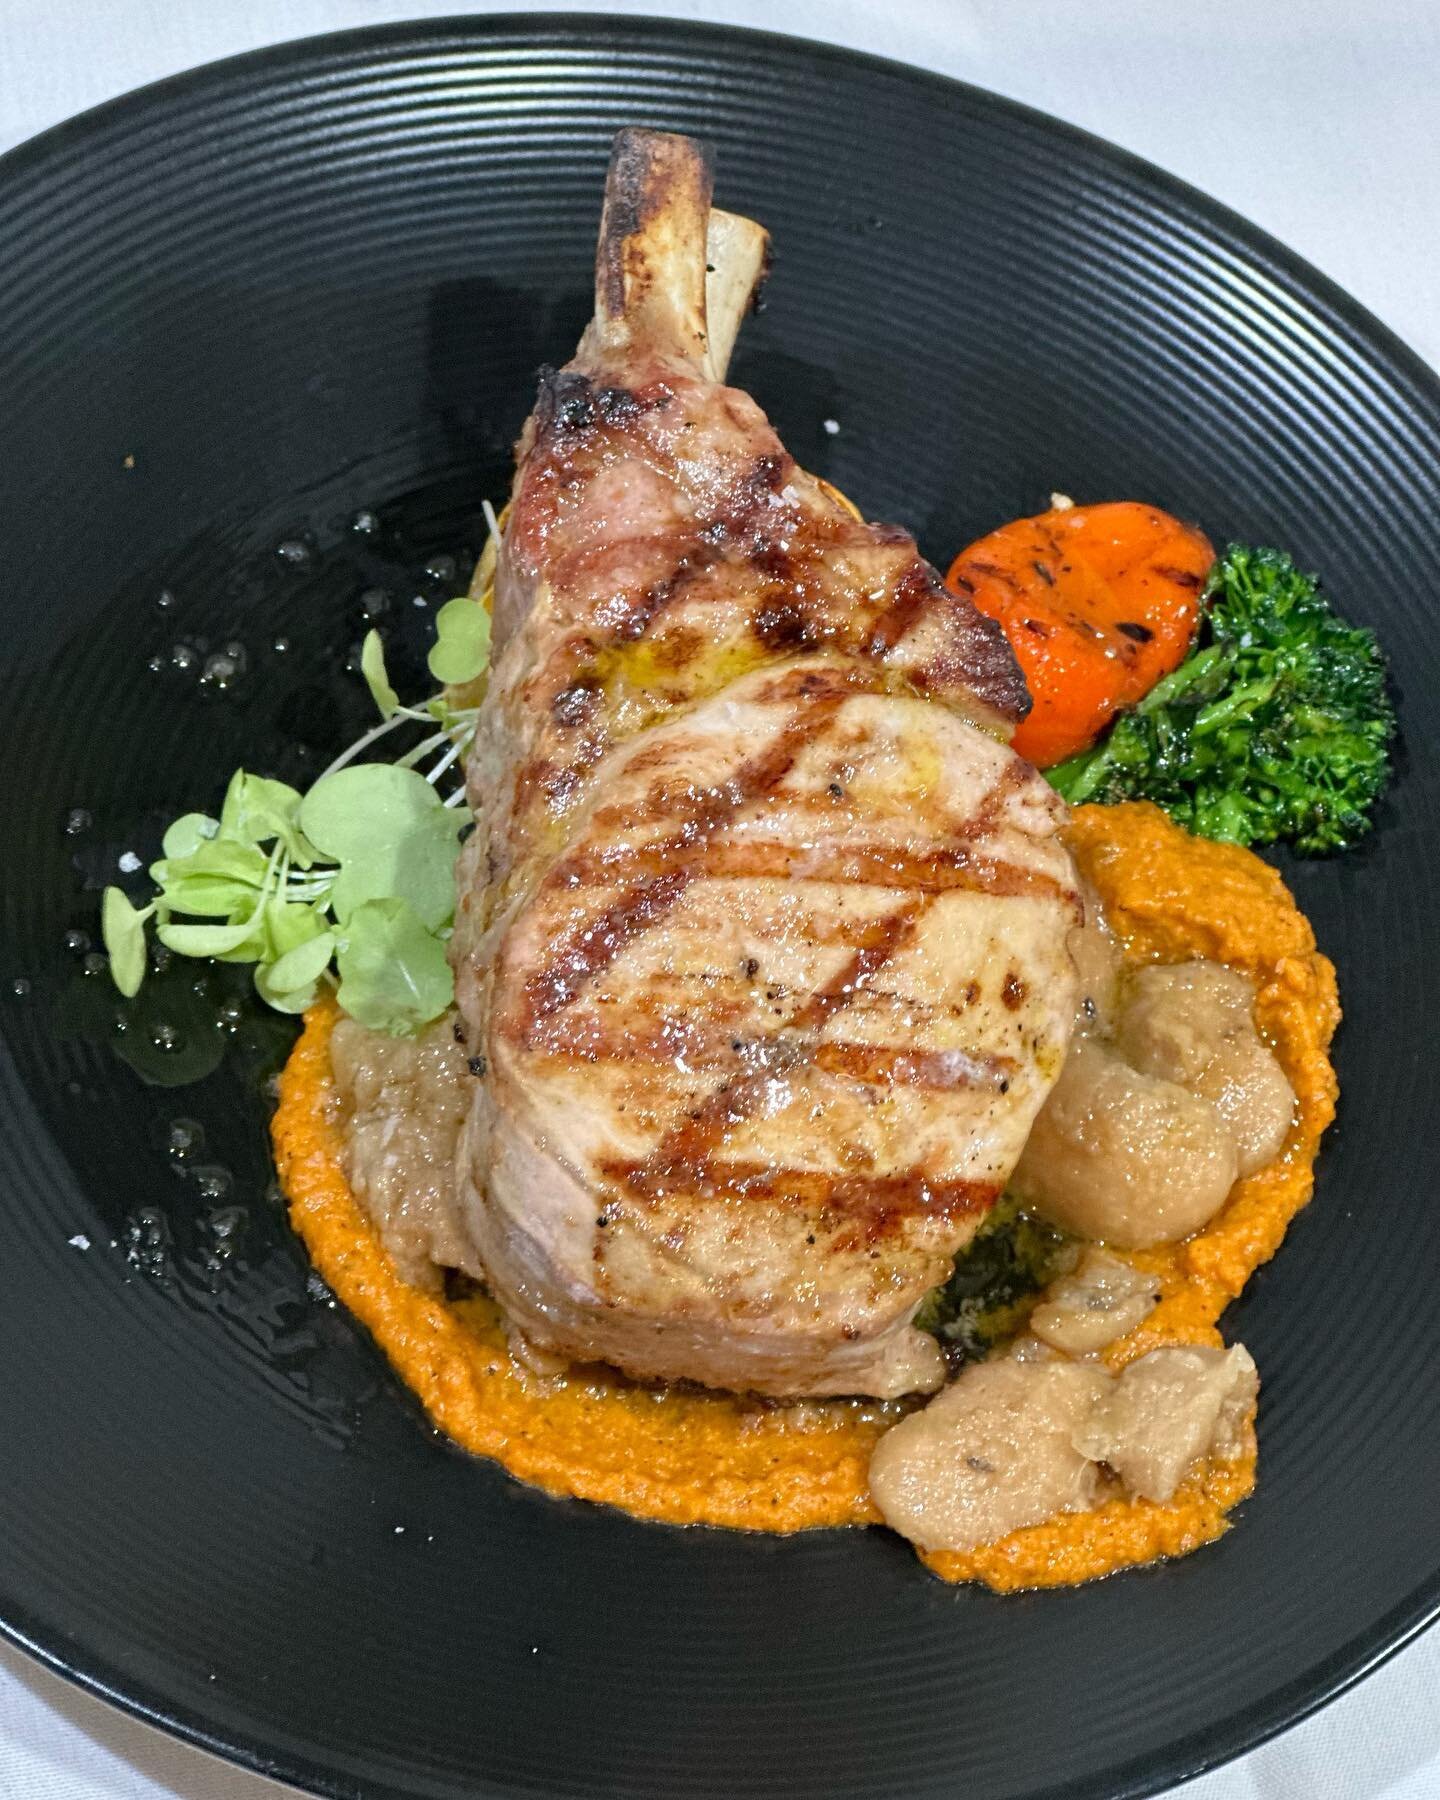 As a Special Entree this Weekend We Have a Grilled Double Cut Pork Chop Served Alongside a Red Pepper Romesco and Corona Beans Saut&eacute;ed in a Smokey Bacon Vinaigrette. Come Enjoy Some Fun Fall Flavors!
.
Open Wednesday to Sunday 5pm-close.
Now T